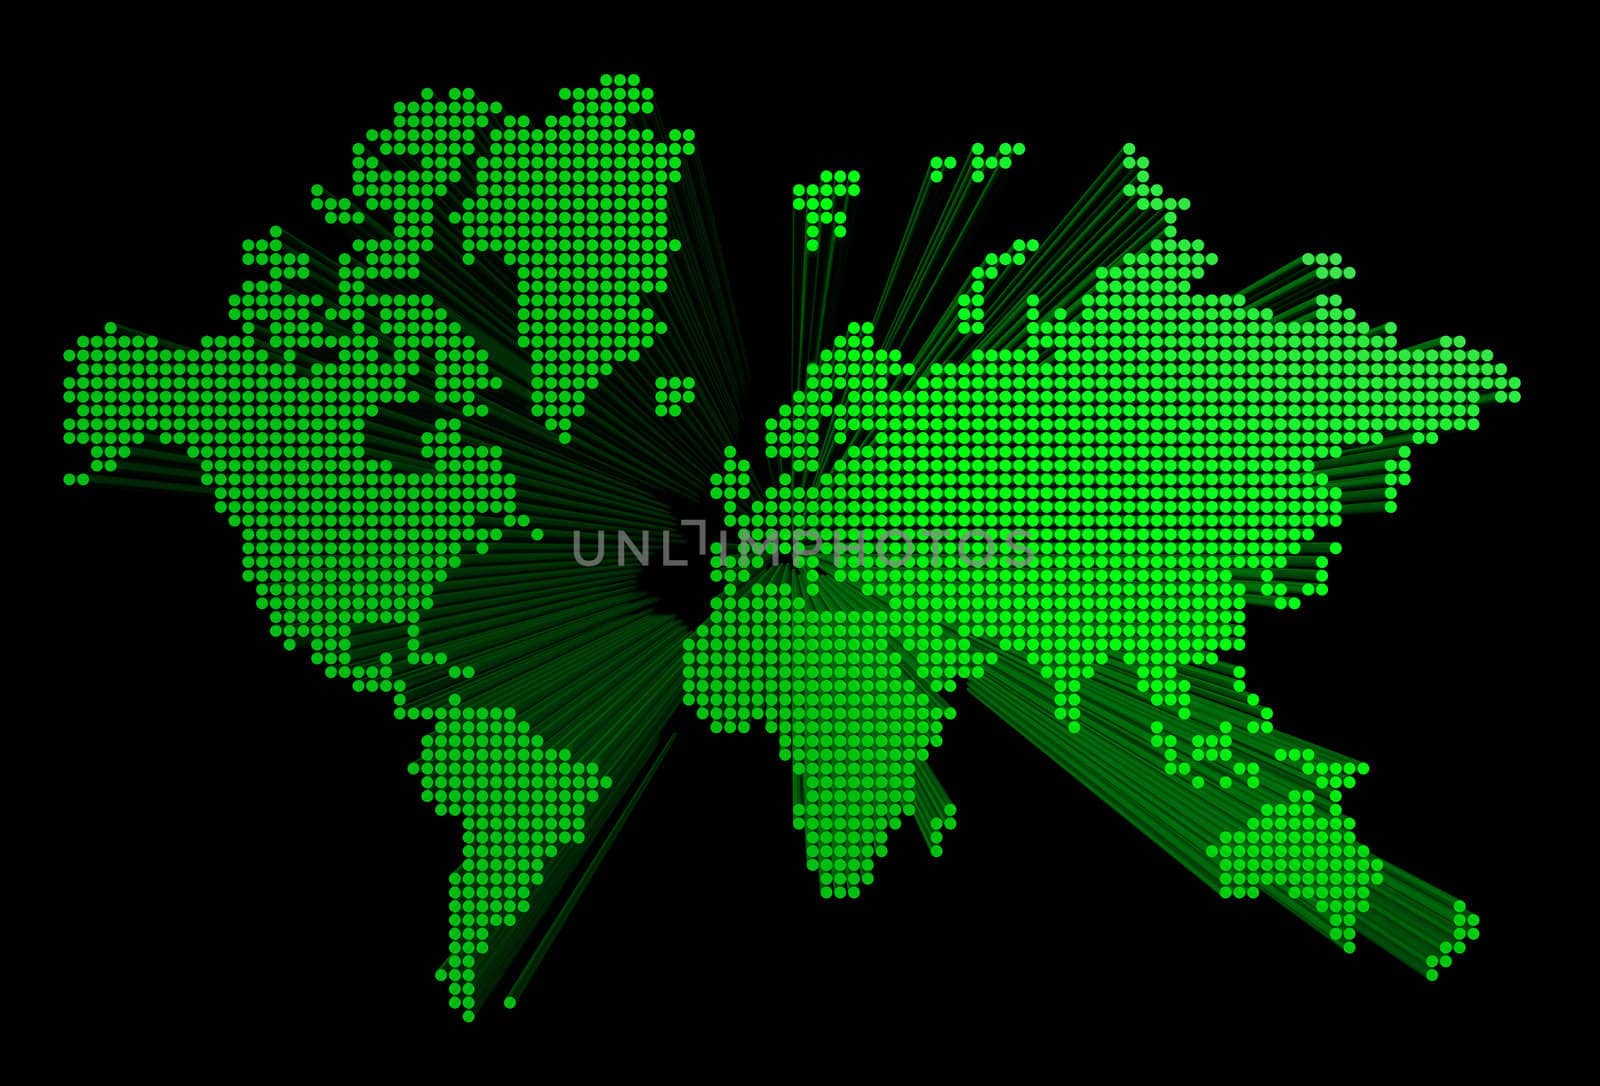 three dimensional green spotted world map isolated on black background